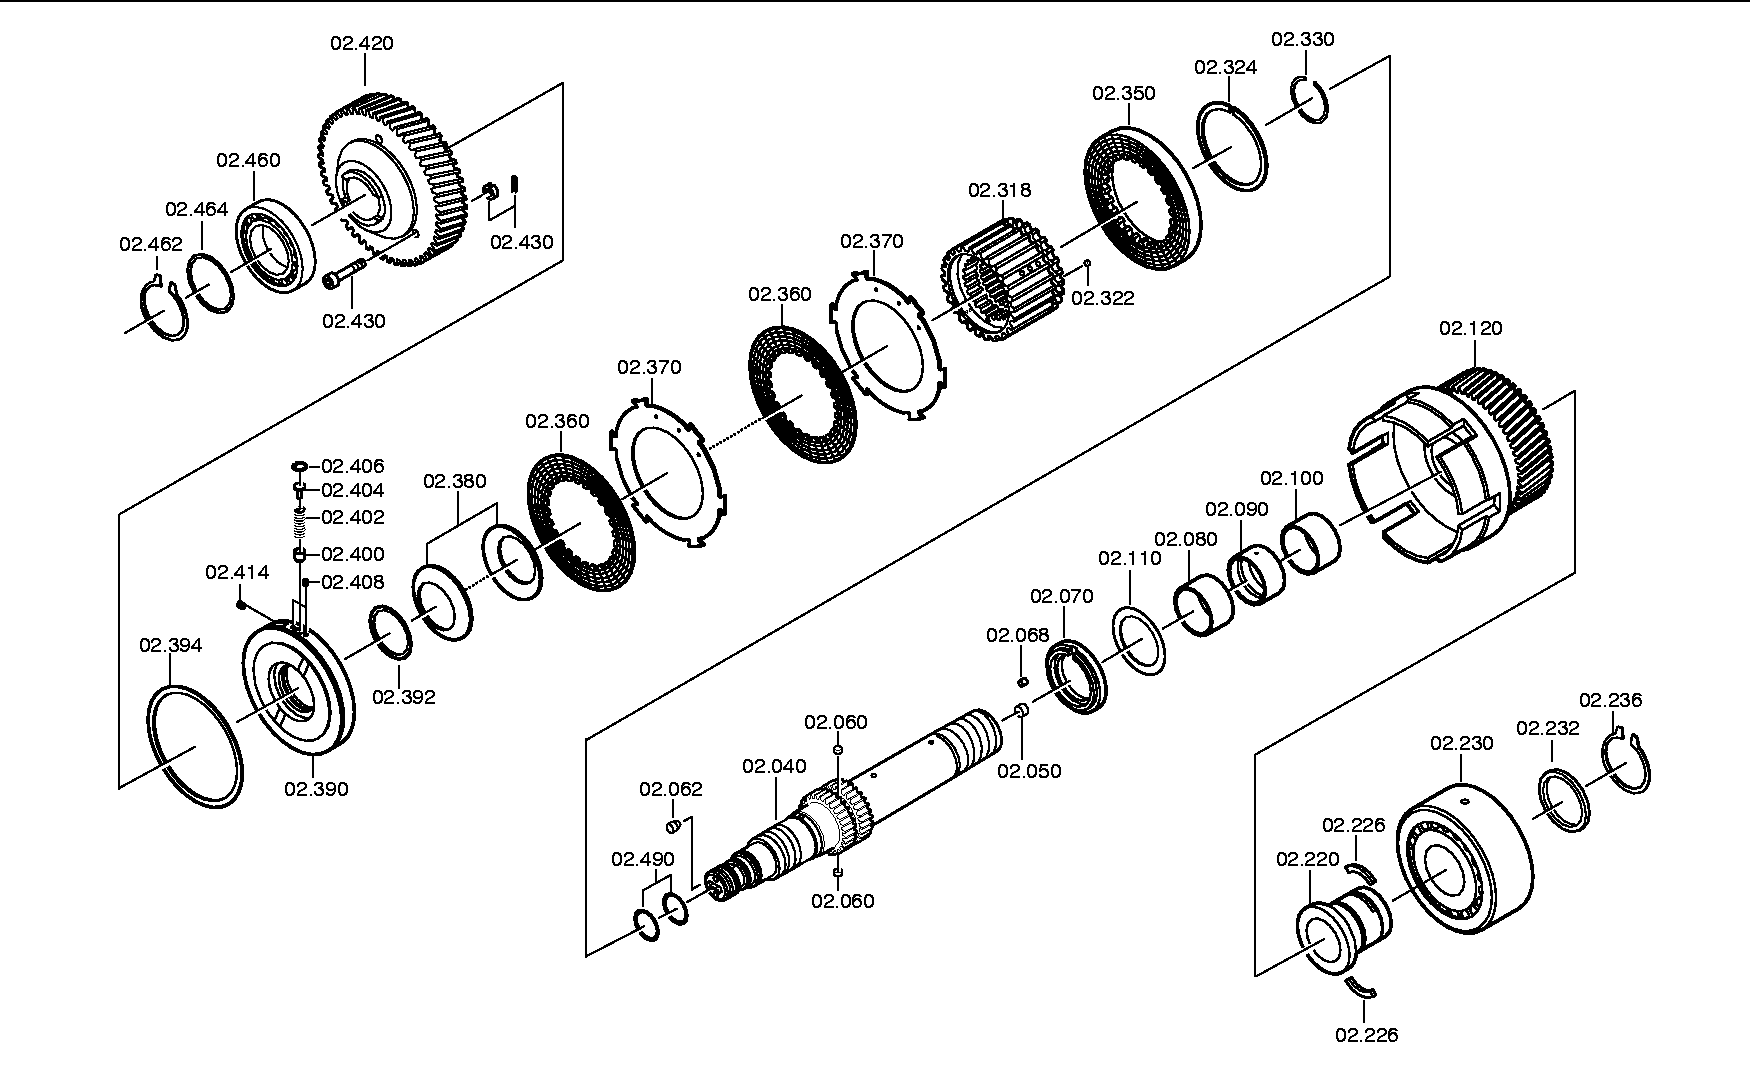 drawing for TEREX EQUIPMENT LIMITED 0012491 - CIRCLIP (figure 1)